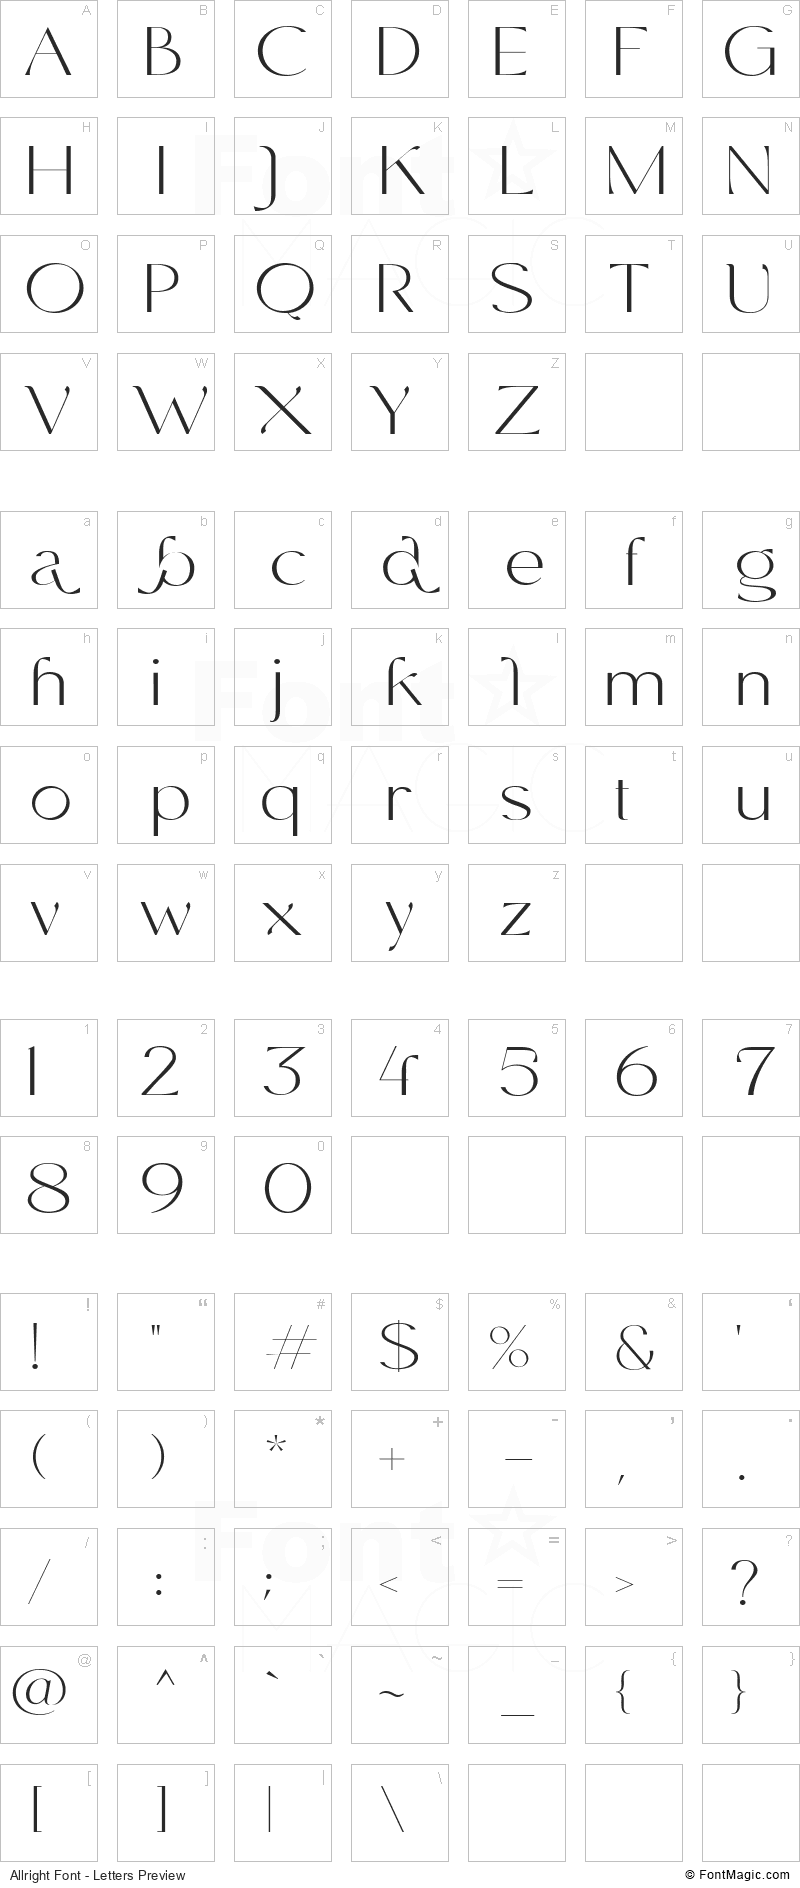 Allright Font - All Latters Preview Chart